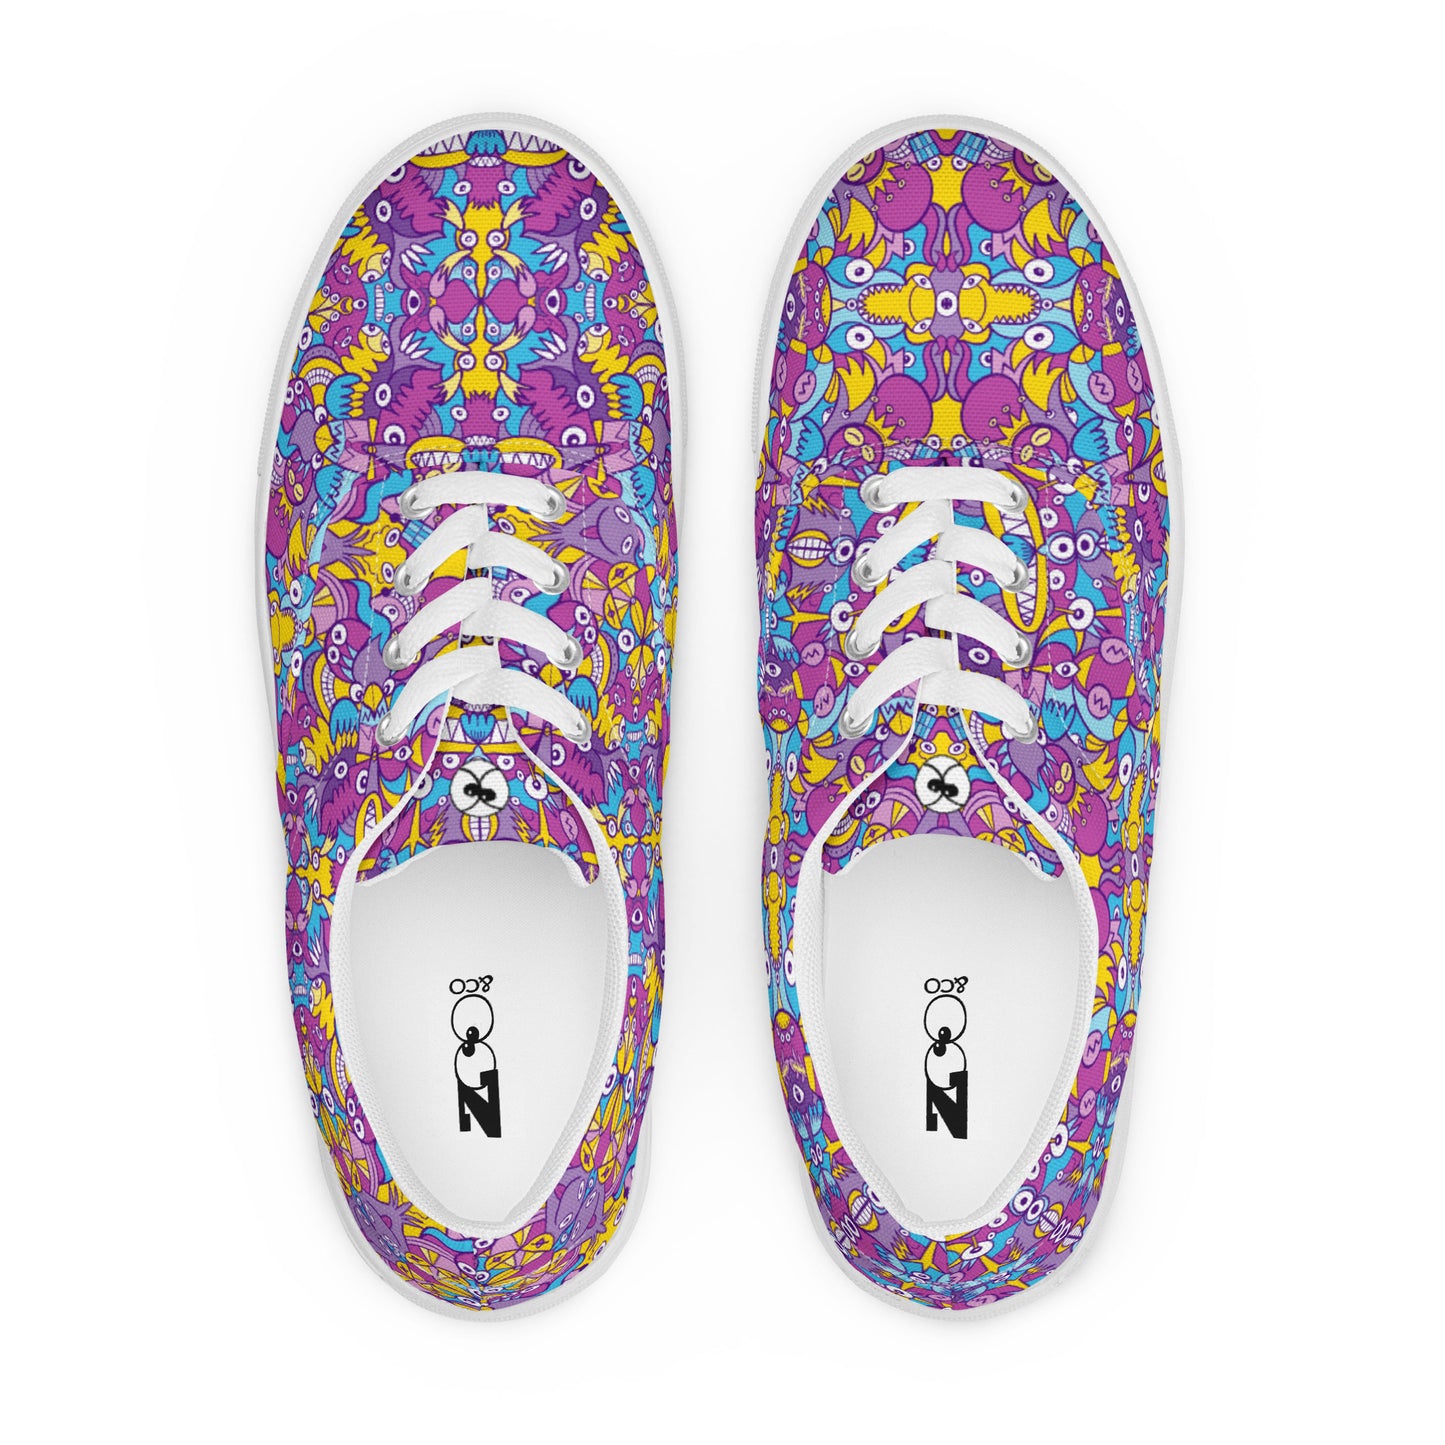 Doodle art compulsion is out of control Women’s lace-up canvas shoes. Top view